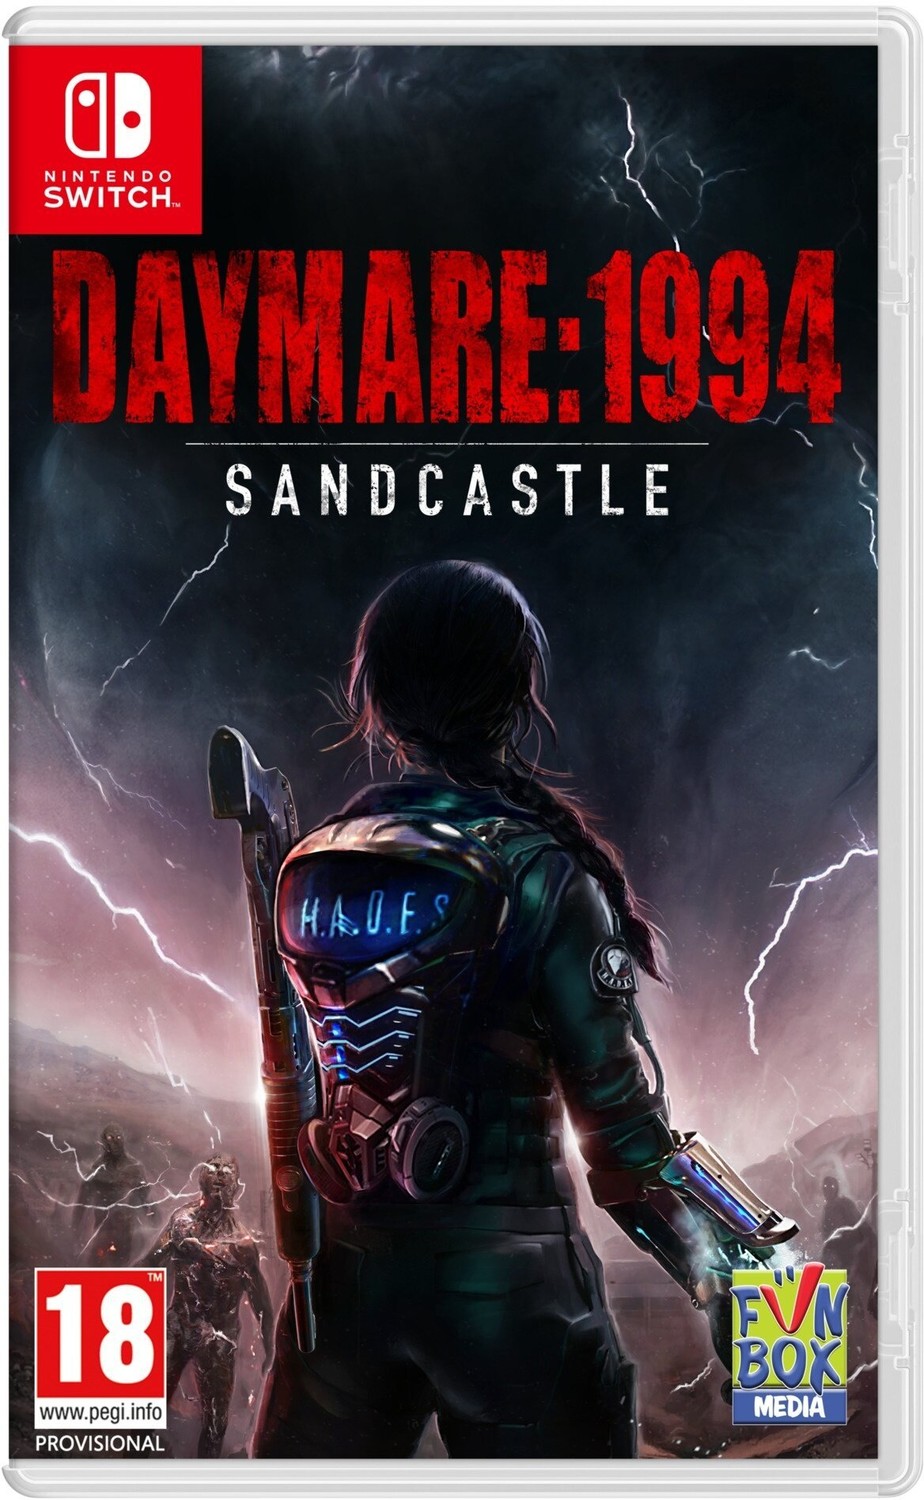 Daymare: 1994 Sandcastle (SWITCH) - 05055377605988